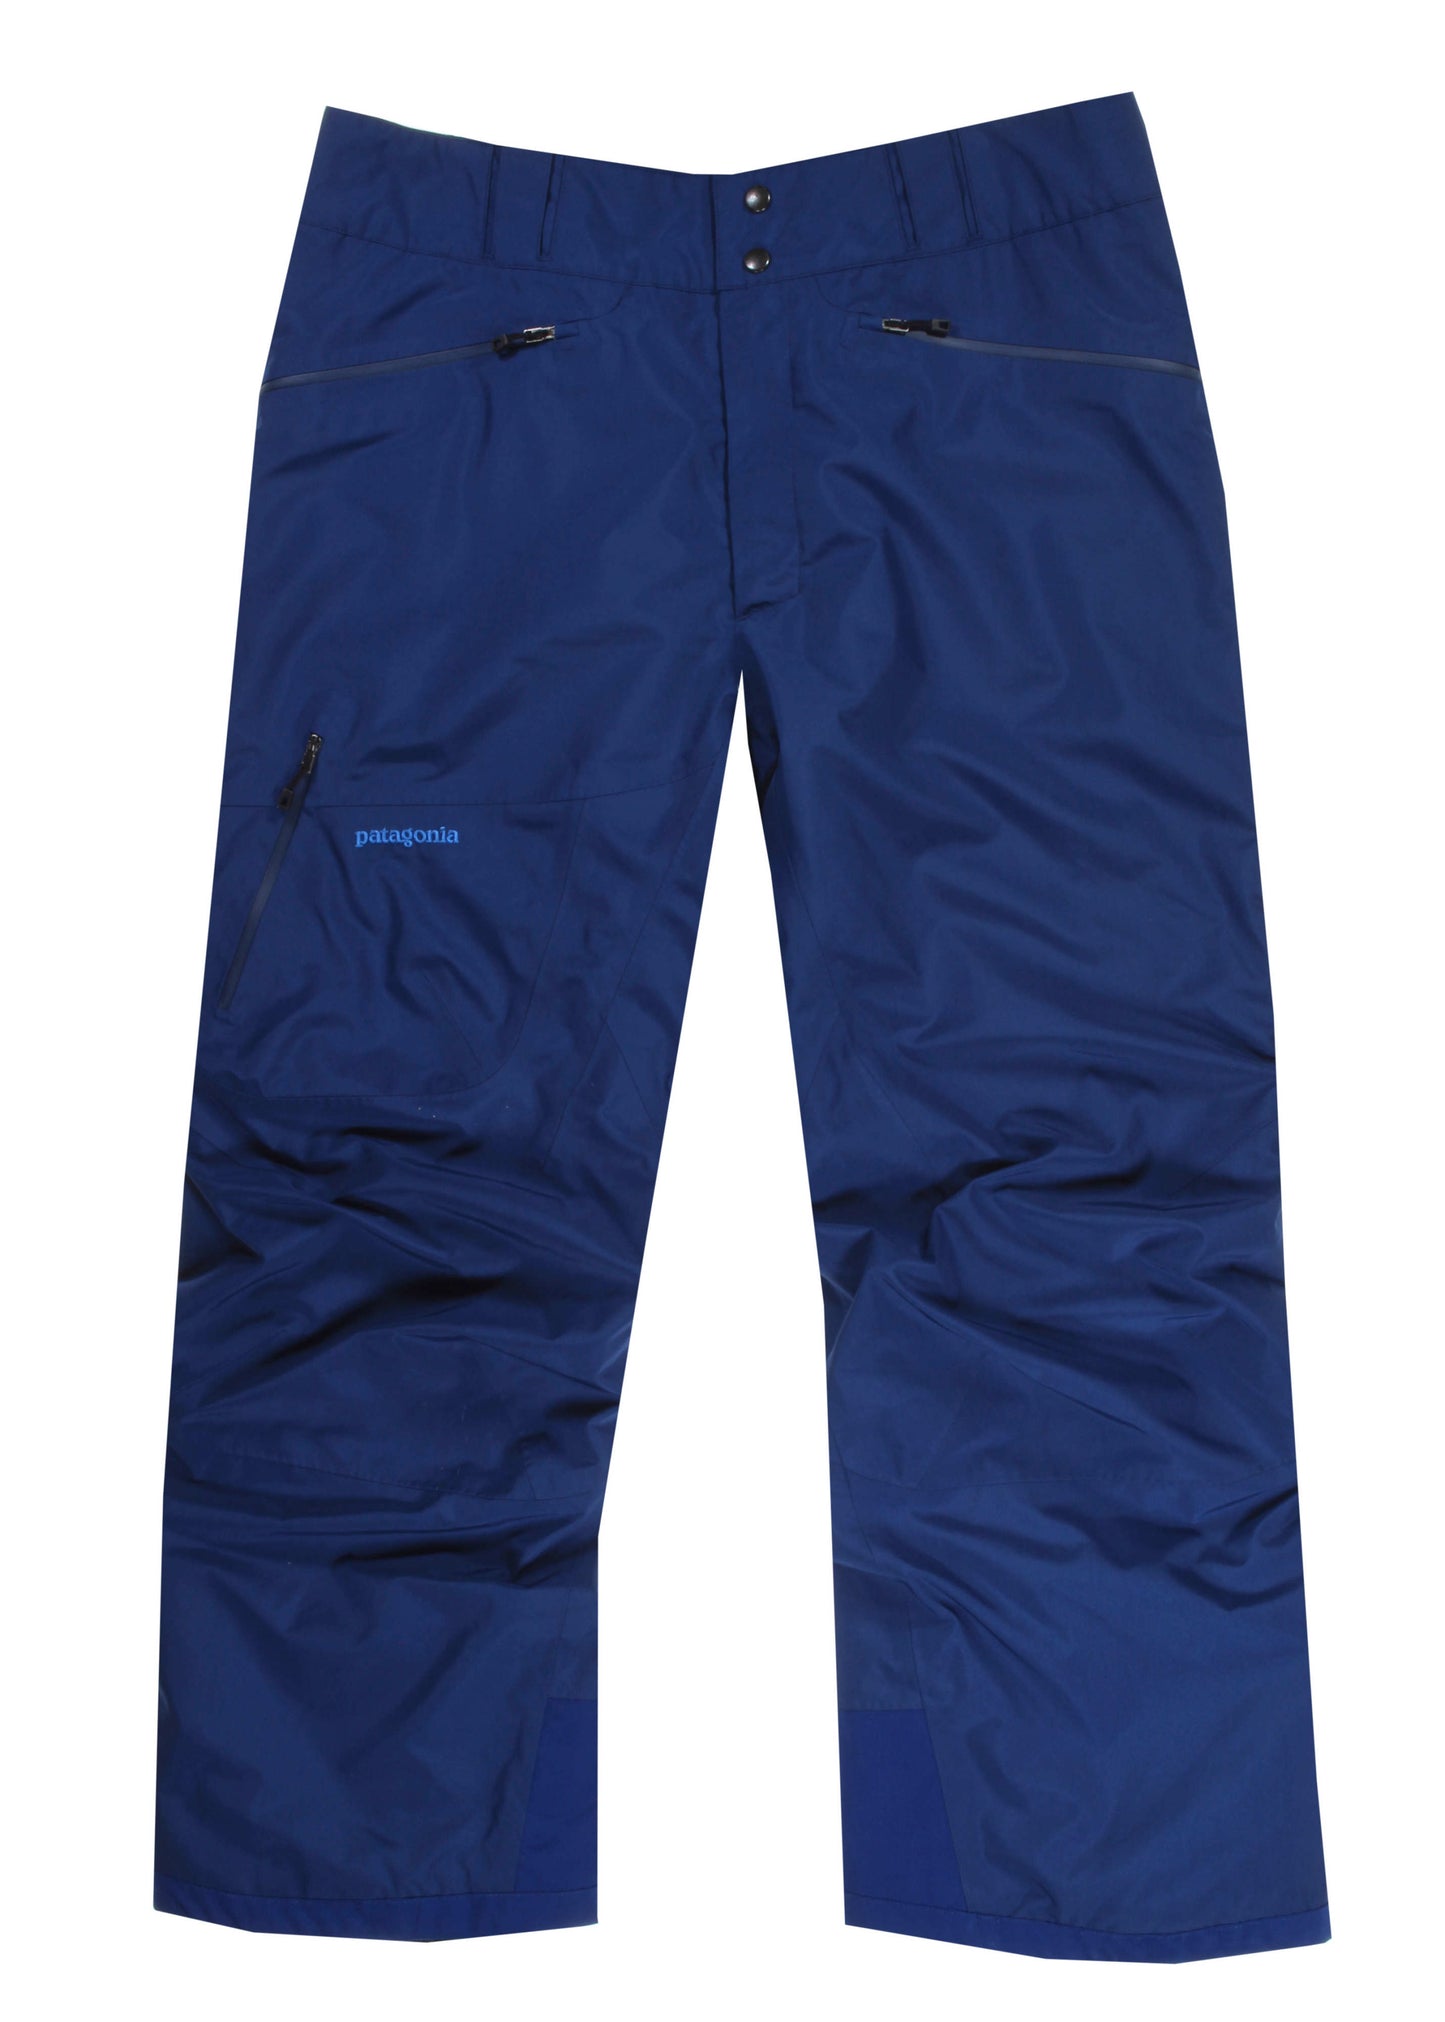 M's Insulated Powder Bowl Pants